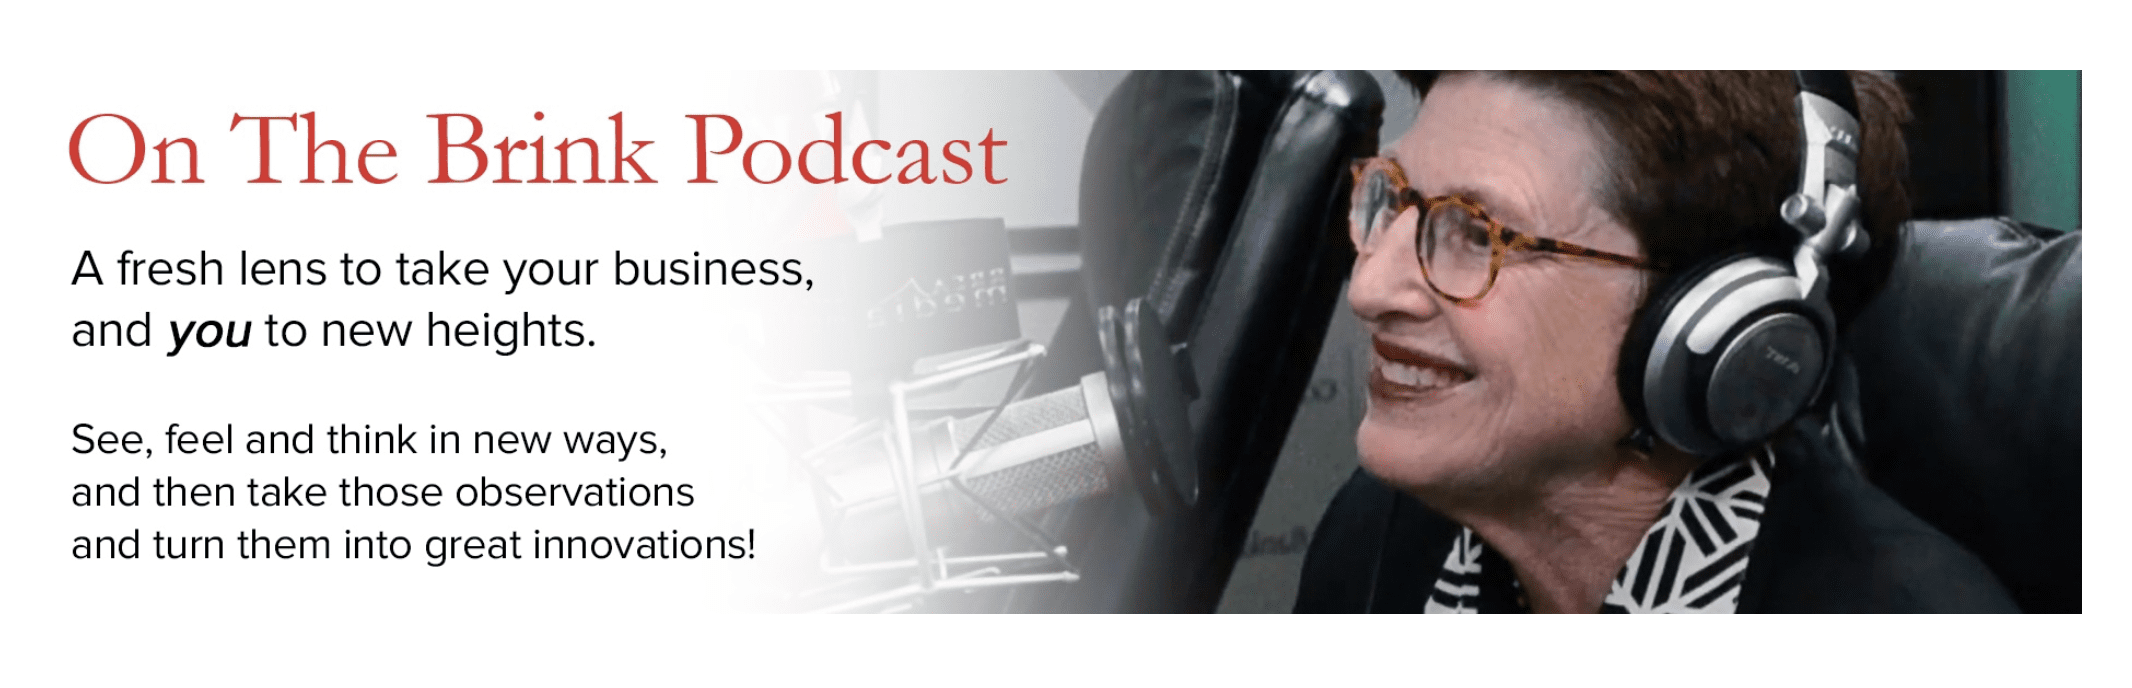 On the Brink Podcast with Andi Simon